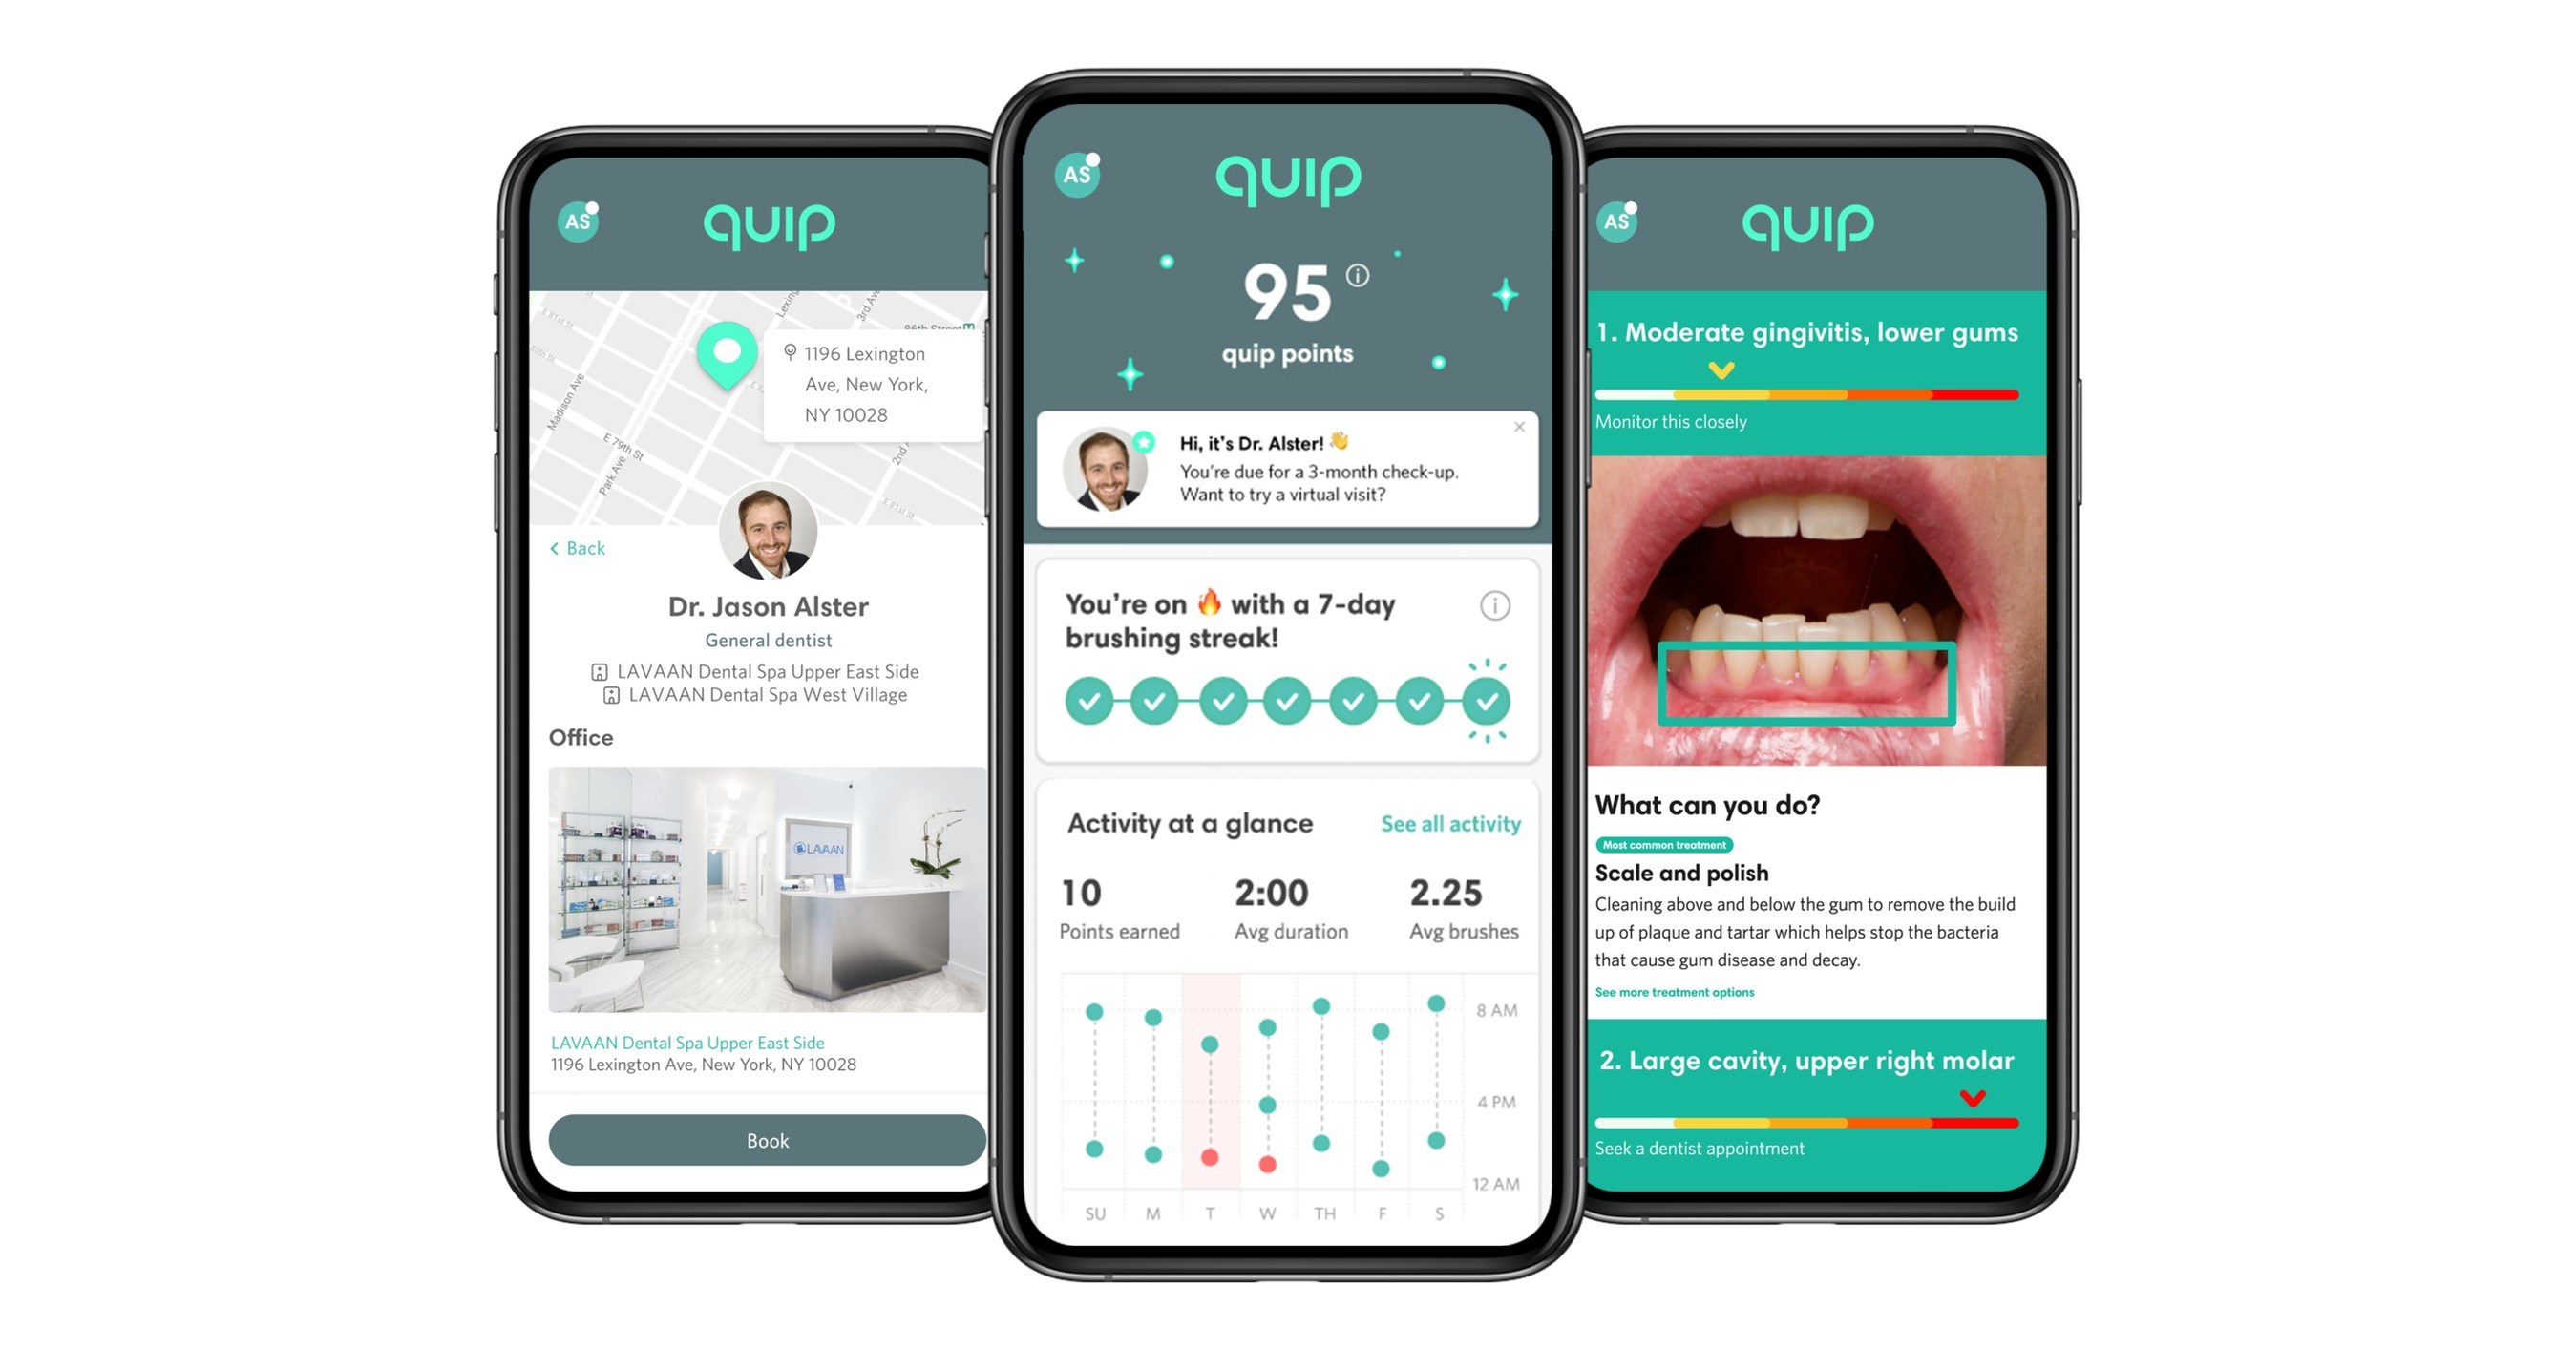 quip Acquires Teledentistry Company Toothpic to Become First 360-degree  Oral Health Service and Improve Dental Care Access for Over 40 Million  People